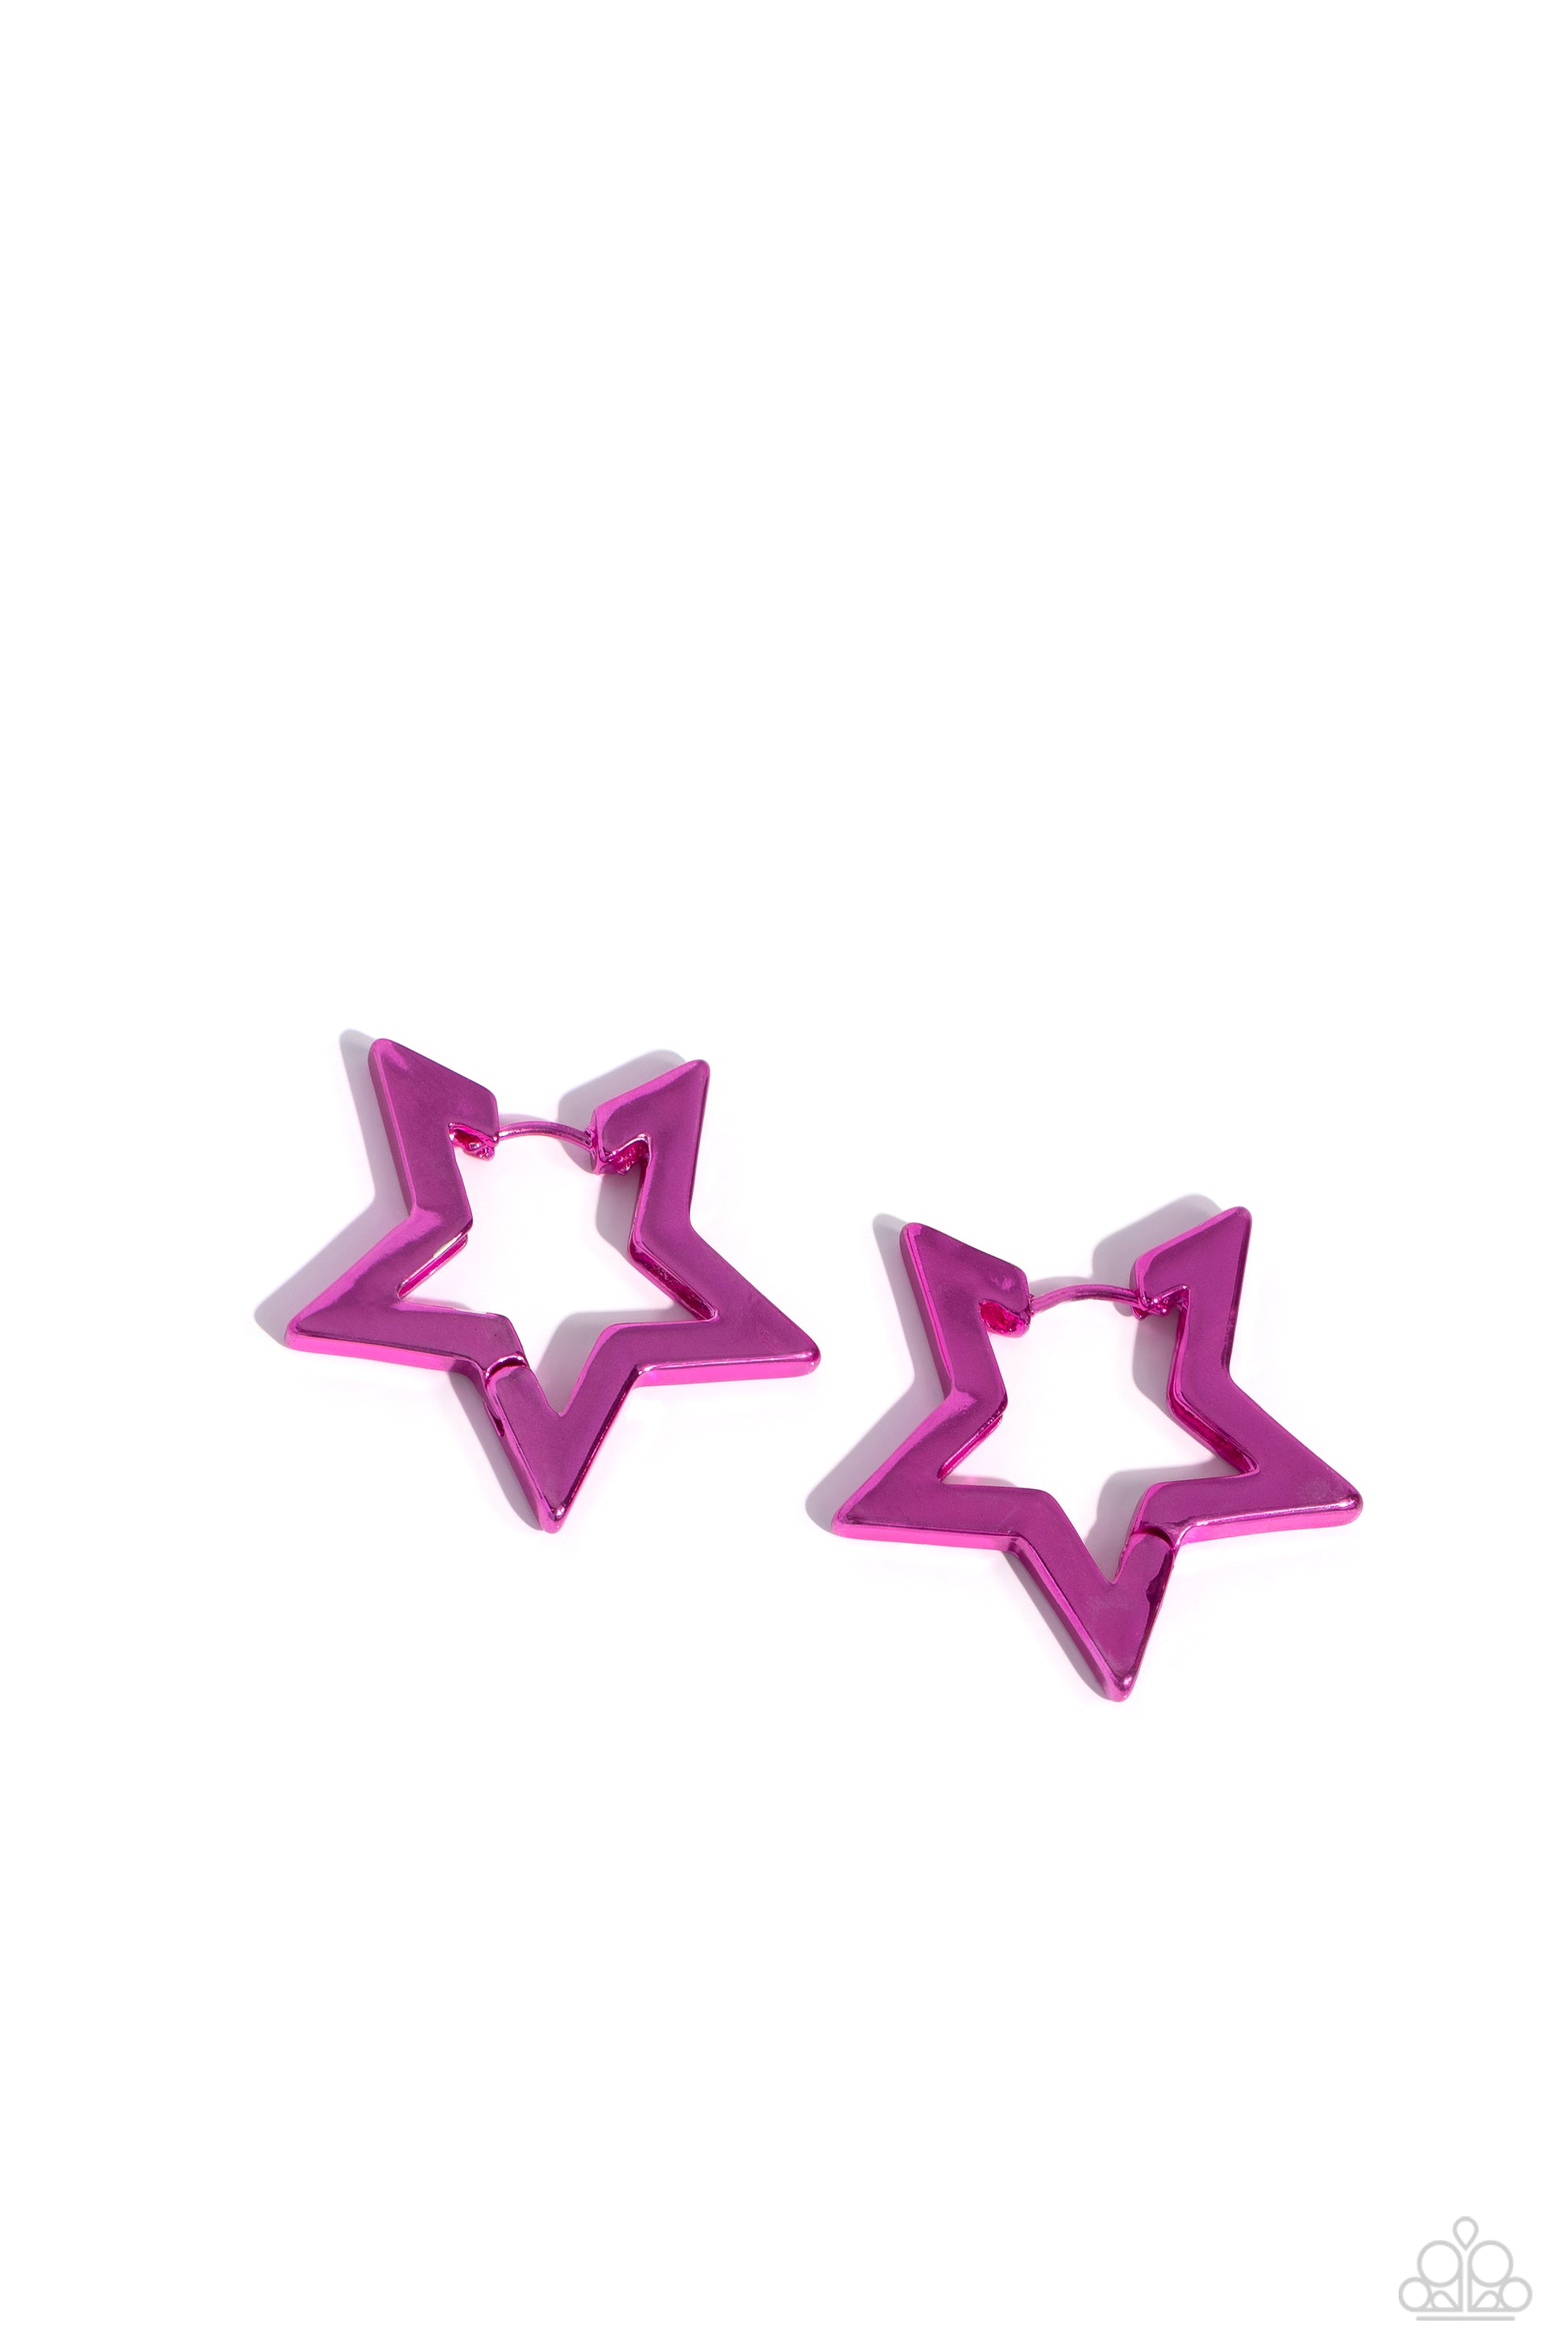 Dipped in an electric pink shade, a three-dimensional star-shaped hoop hinges around the ear resulting in a stellar statement. Earring attaches to a standard hinge closure fitting. Hoop measures approximately 1 1/4" in diameter.  Sold as one pair of hoop earrings.